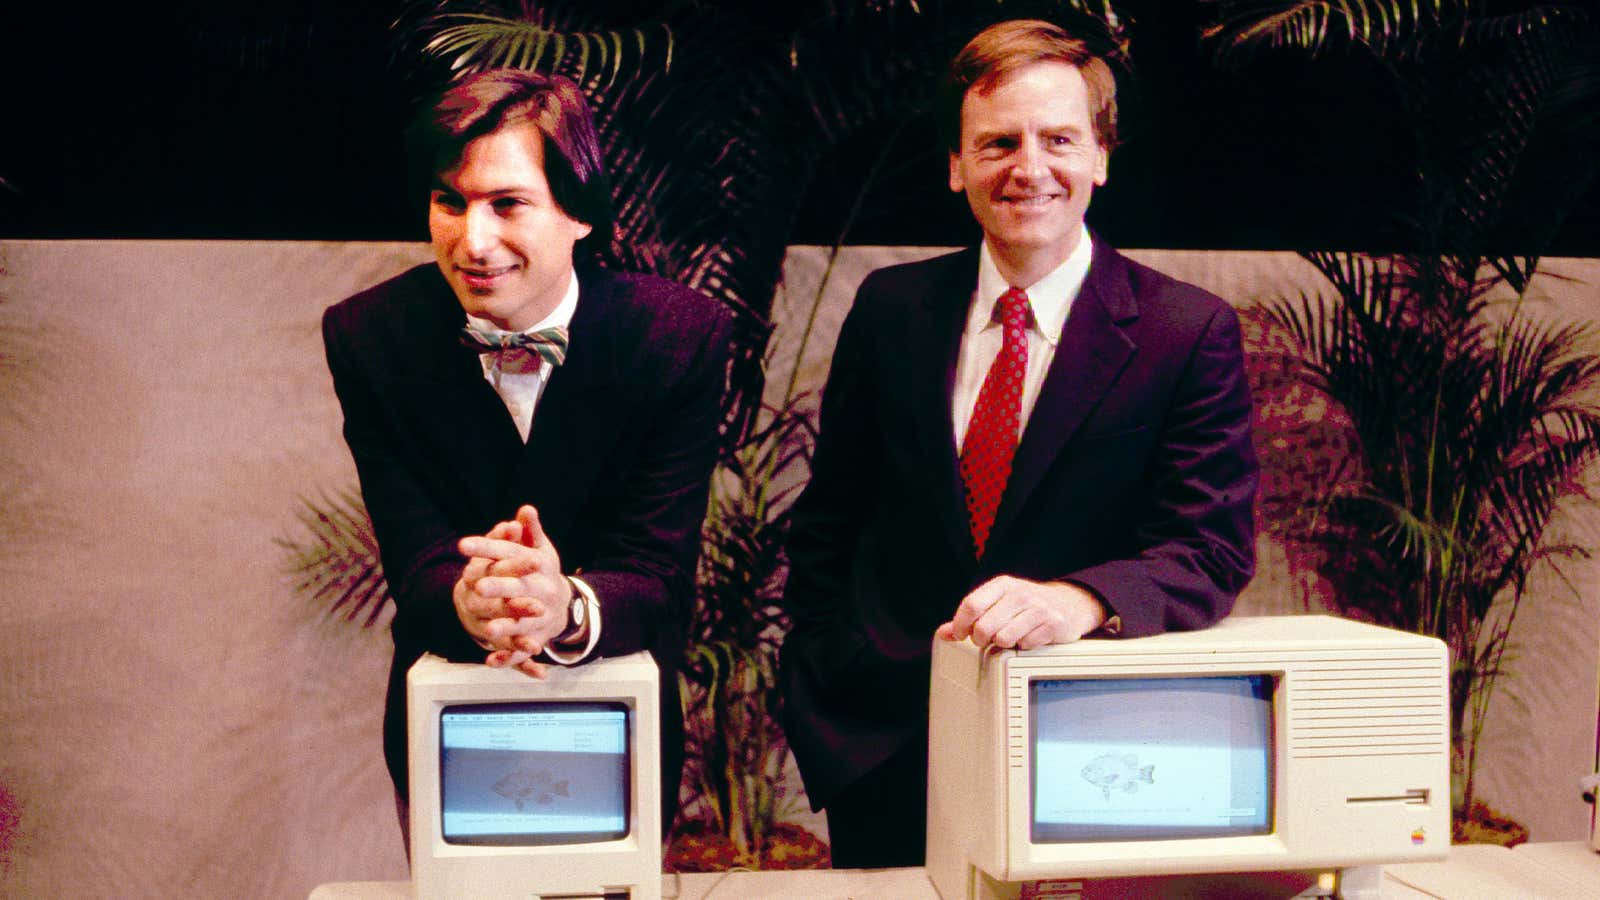 Jobs and Sculley in 1984.